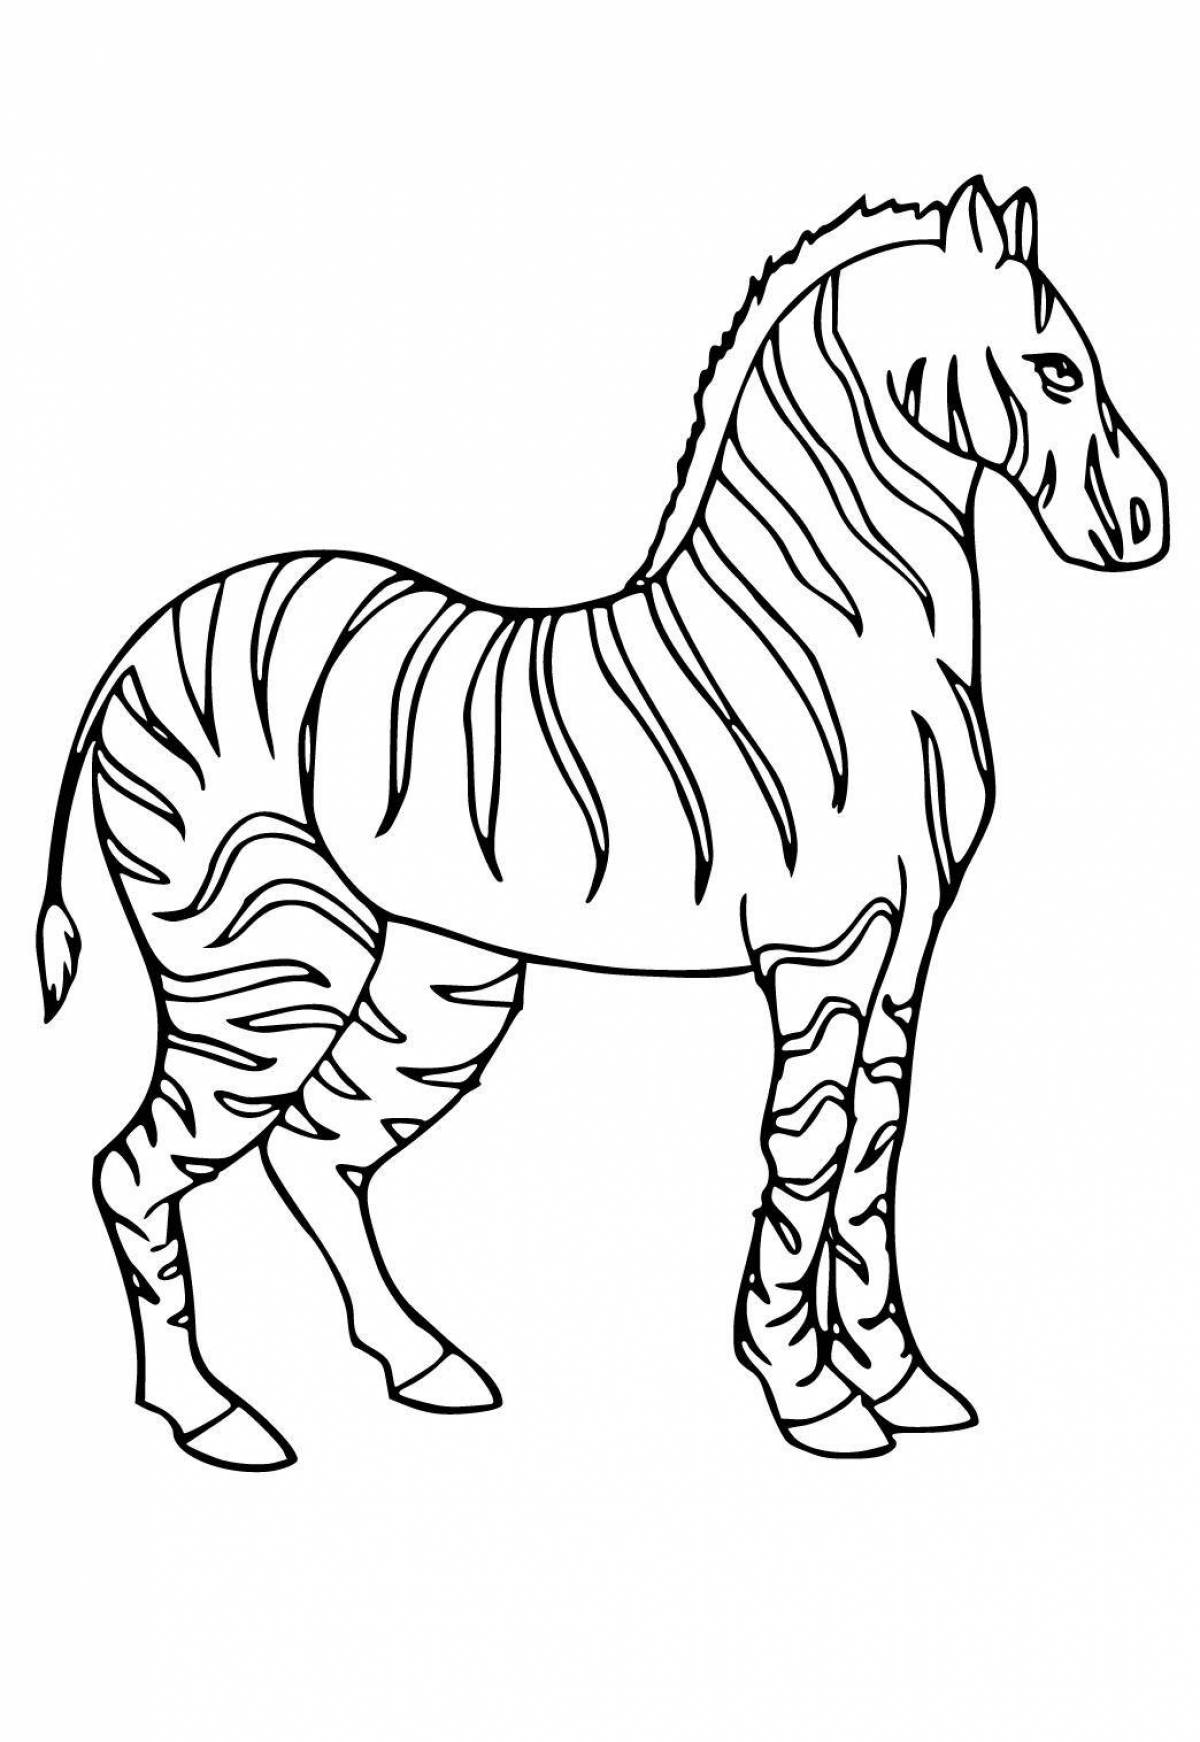 Fancy zebra coloring book for kids 3-4 years old